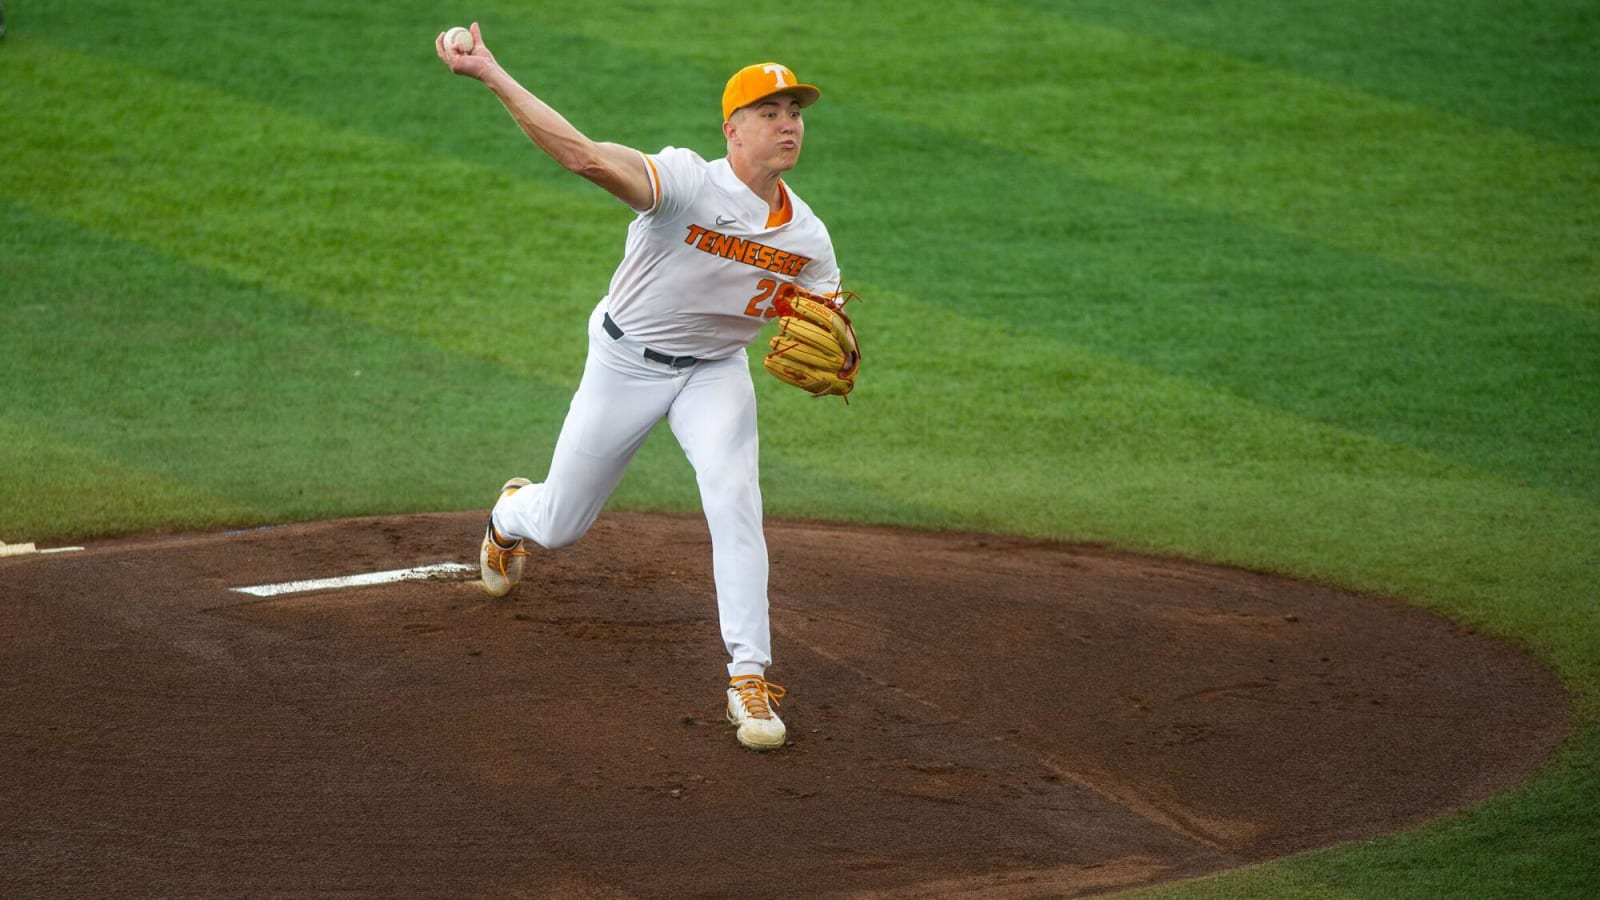 The New York media did former Tennessee Vols baseball standout Blade Tidwell dirty